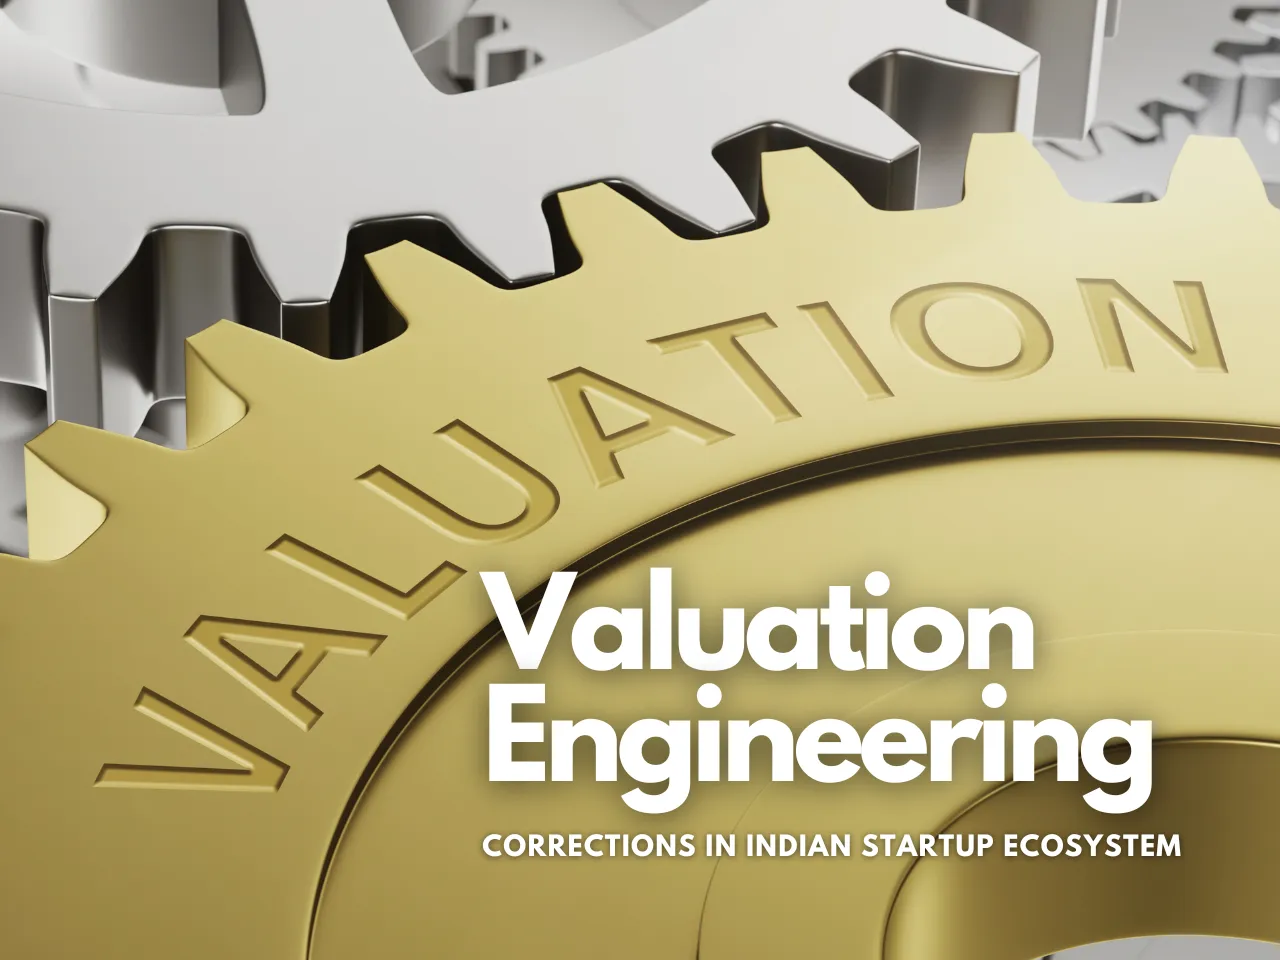 Game Of Valuations: Challenges & Opportunities for Indian Startups